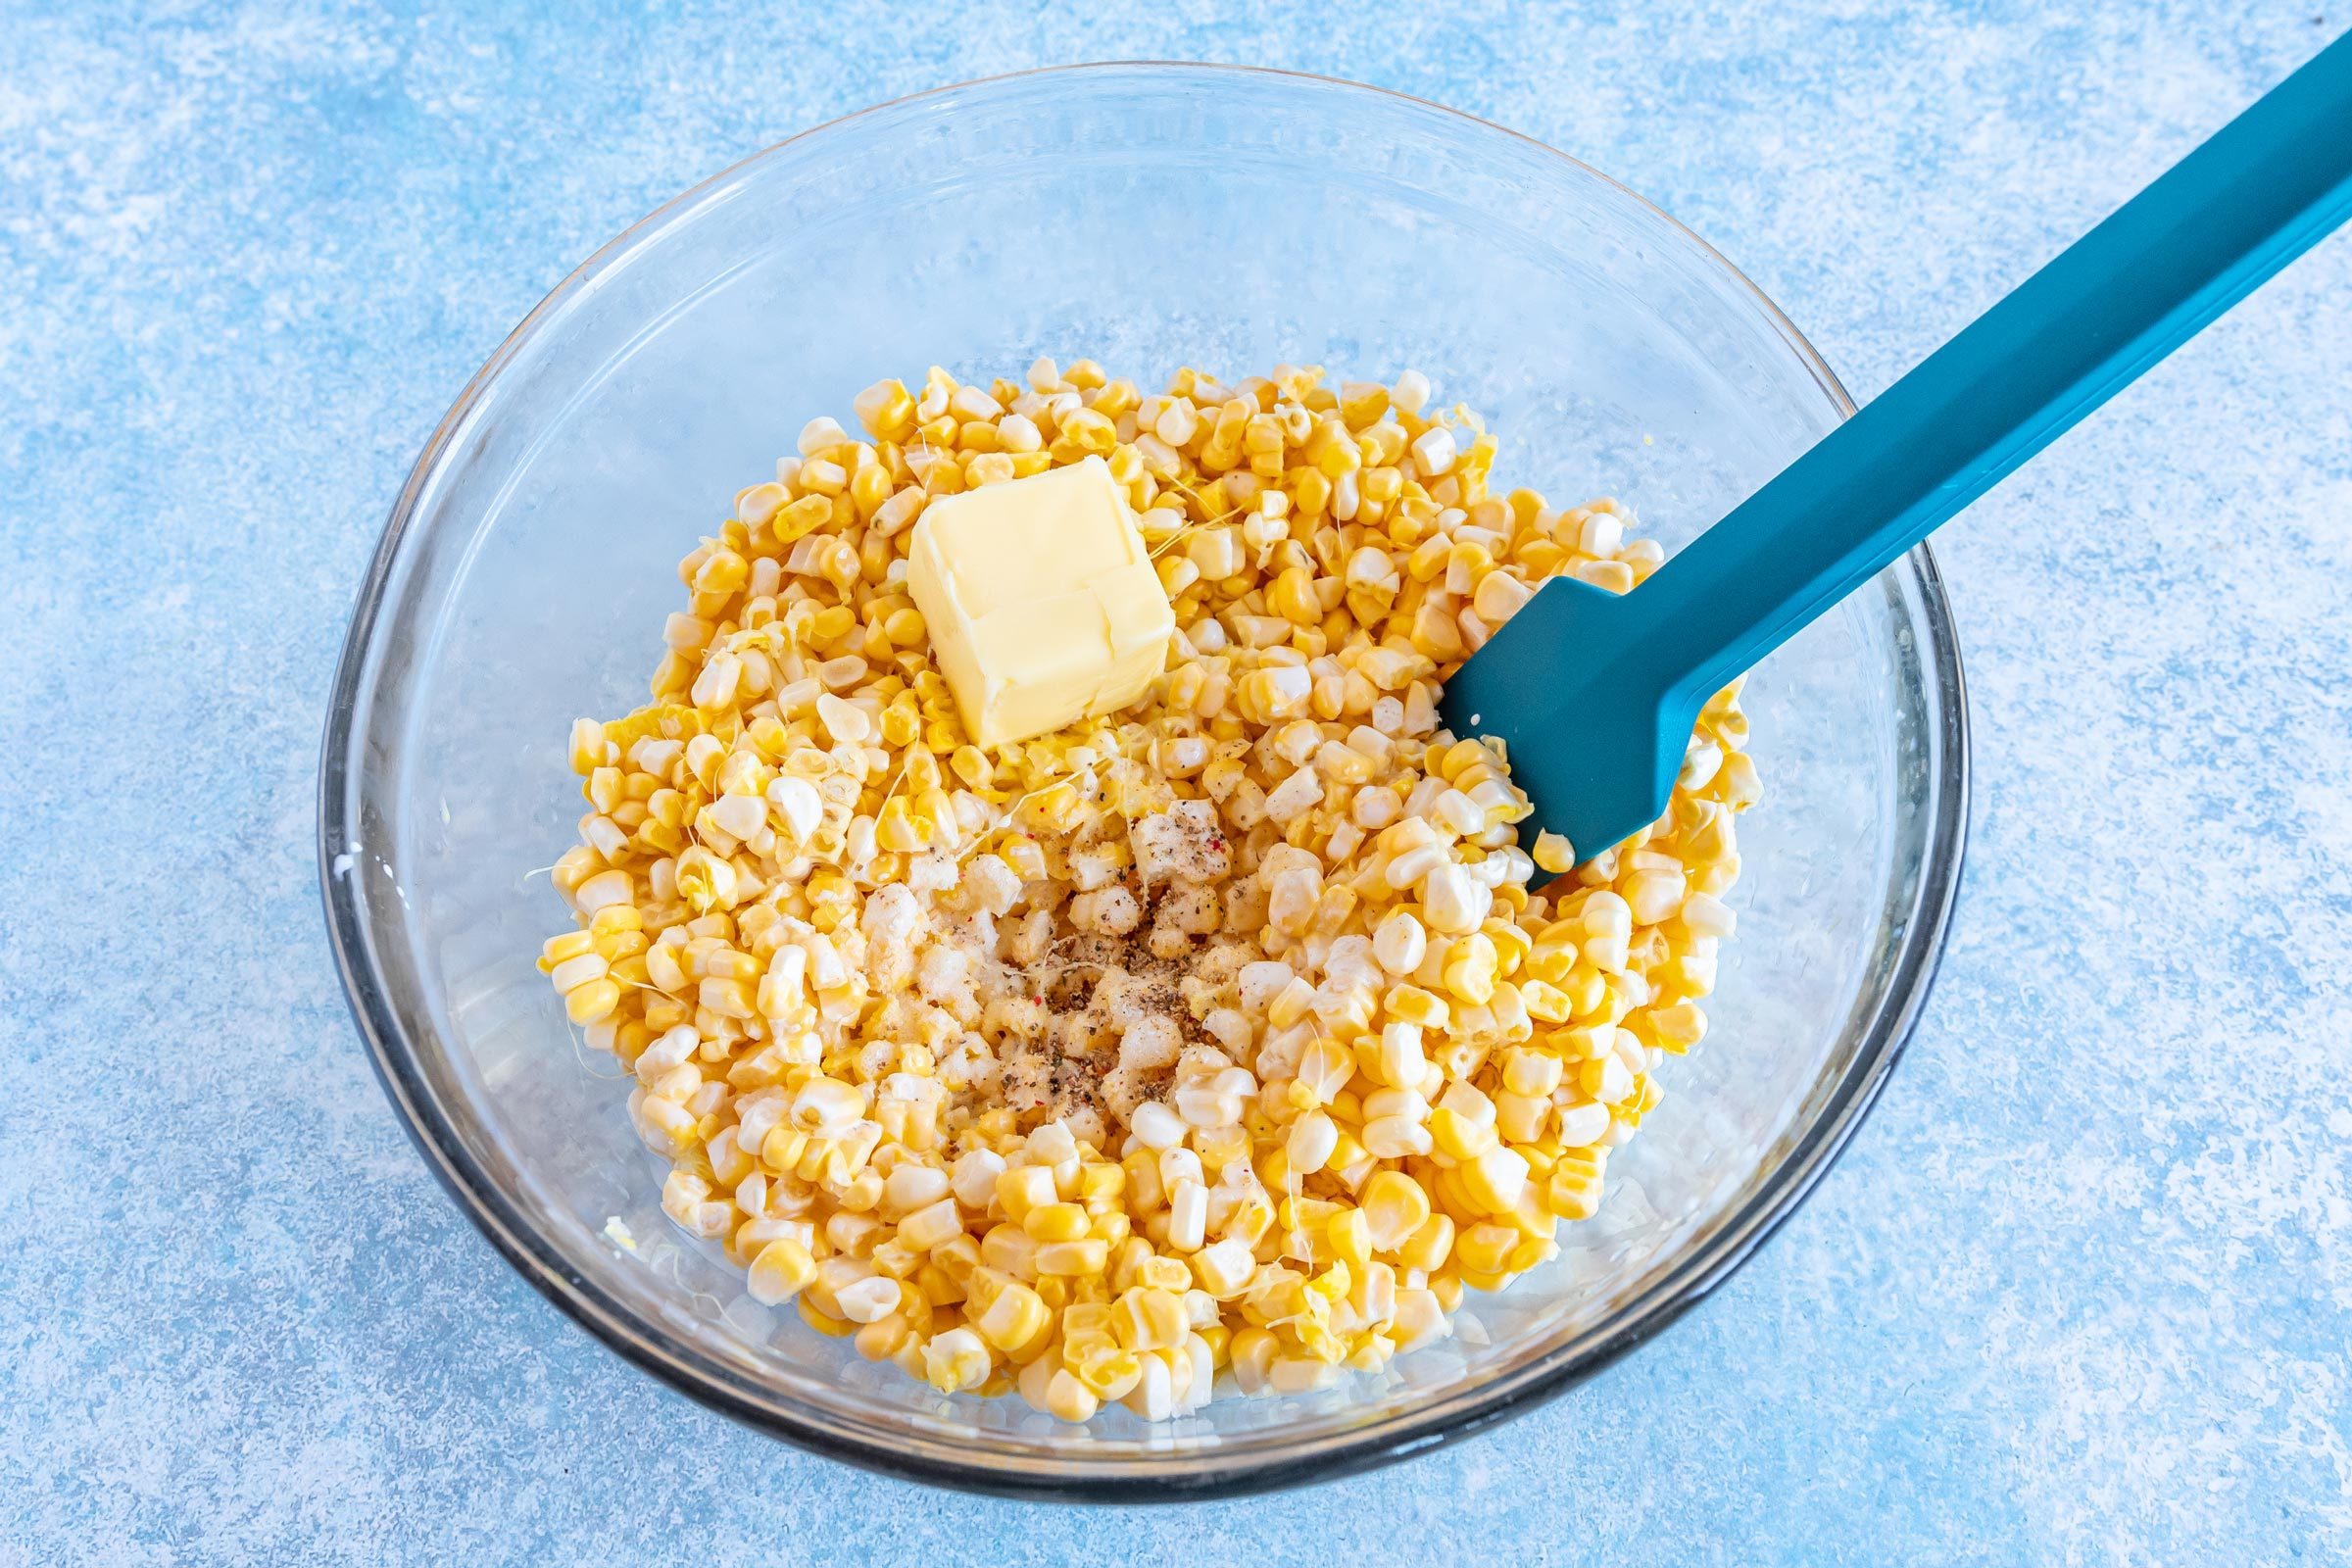 mixing corn and ingredients with a teal rubber spatula in a clear glass bowl